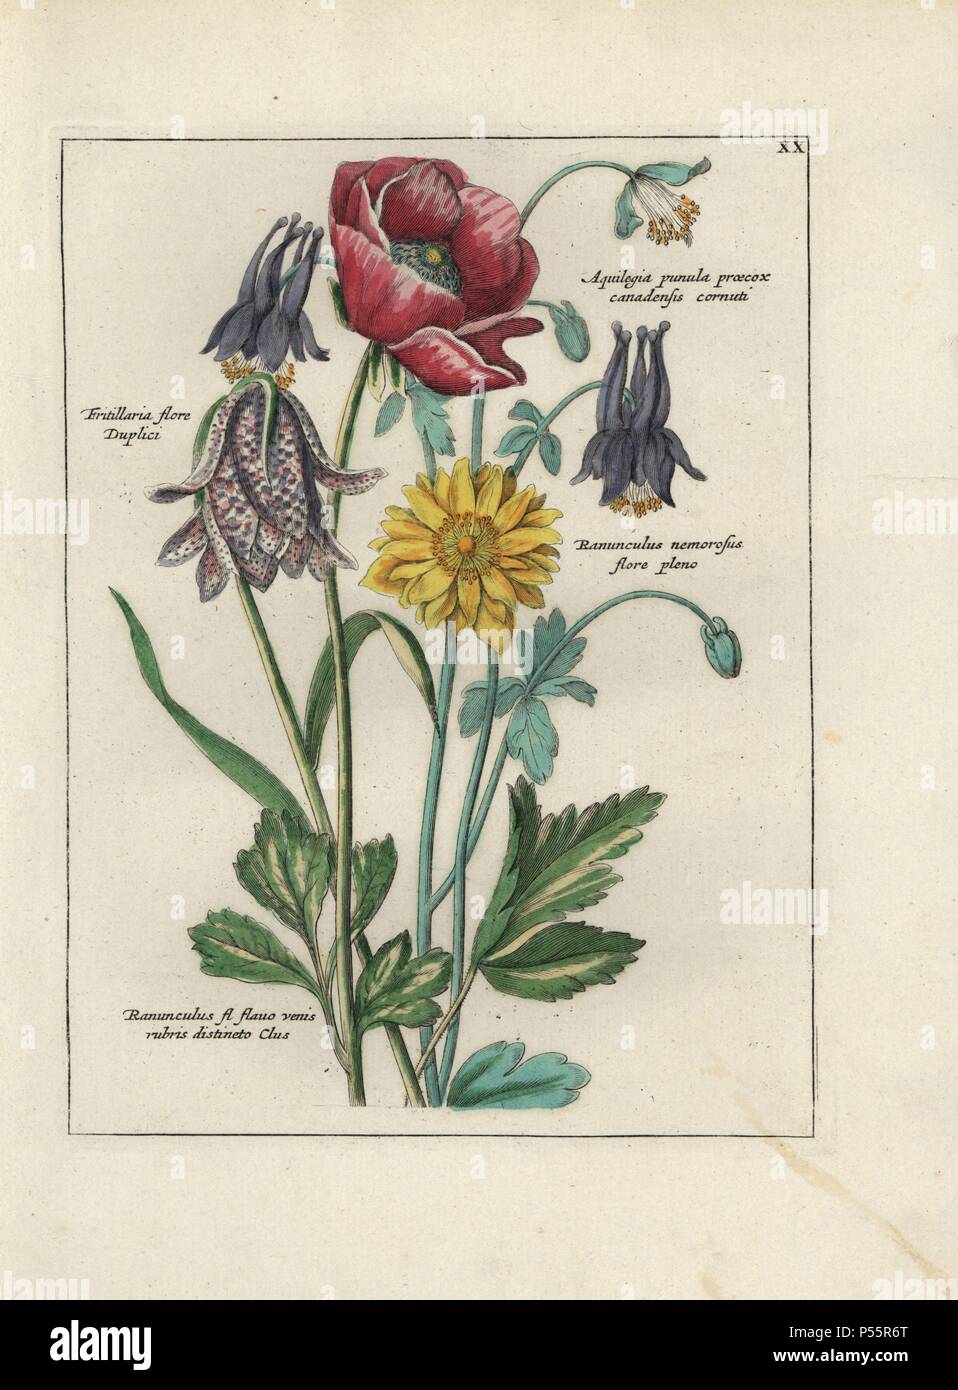 Buttercup, Ranunculus fl. flauo, double fritillary, Fritillaria flore duplici, Canada columbine, Aquilegia canadensis, and wood buttercup, Ranunculus nemorosus. Handcoloured copperplate botanical engraving from 'Nederlandsch Bloemwerk' (Dutch Flower Arrangements), Amsterdam, J.B. Elwe, 1794. Illustration copied from a work by one of the outstanding French flower painters of the 17th century, Nicolas Robert (1614-1685), entitled 'Variae ac multiformes florum species.. Diverses fleurs,' Paris, 1660. Stock Photo